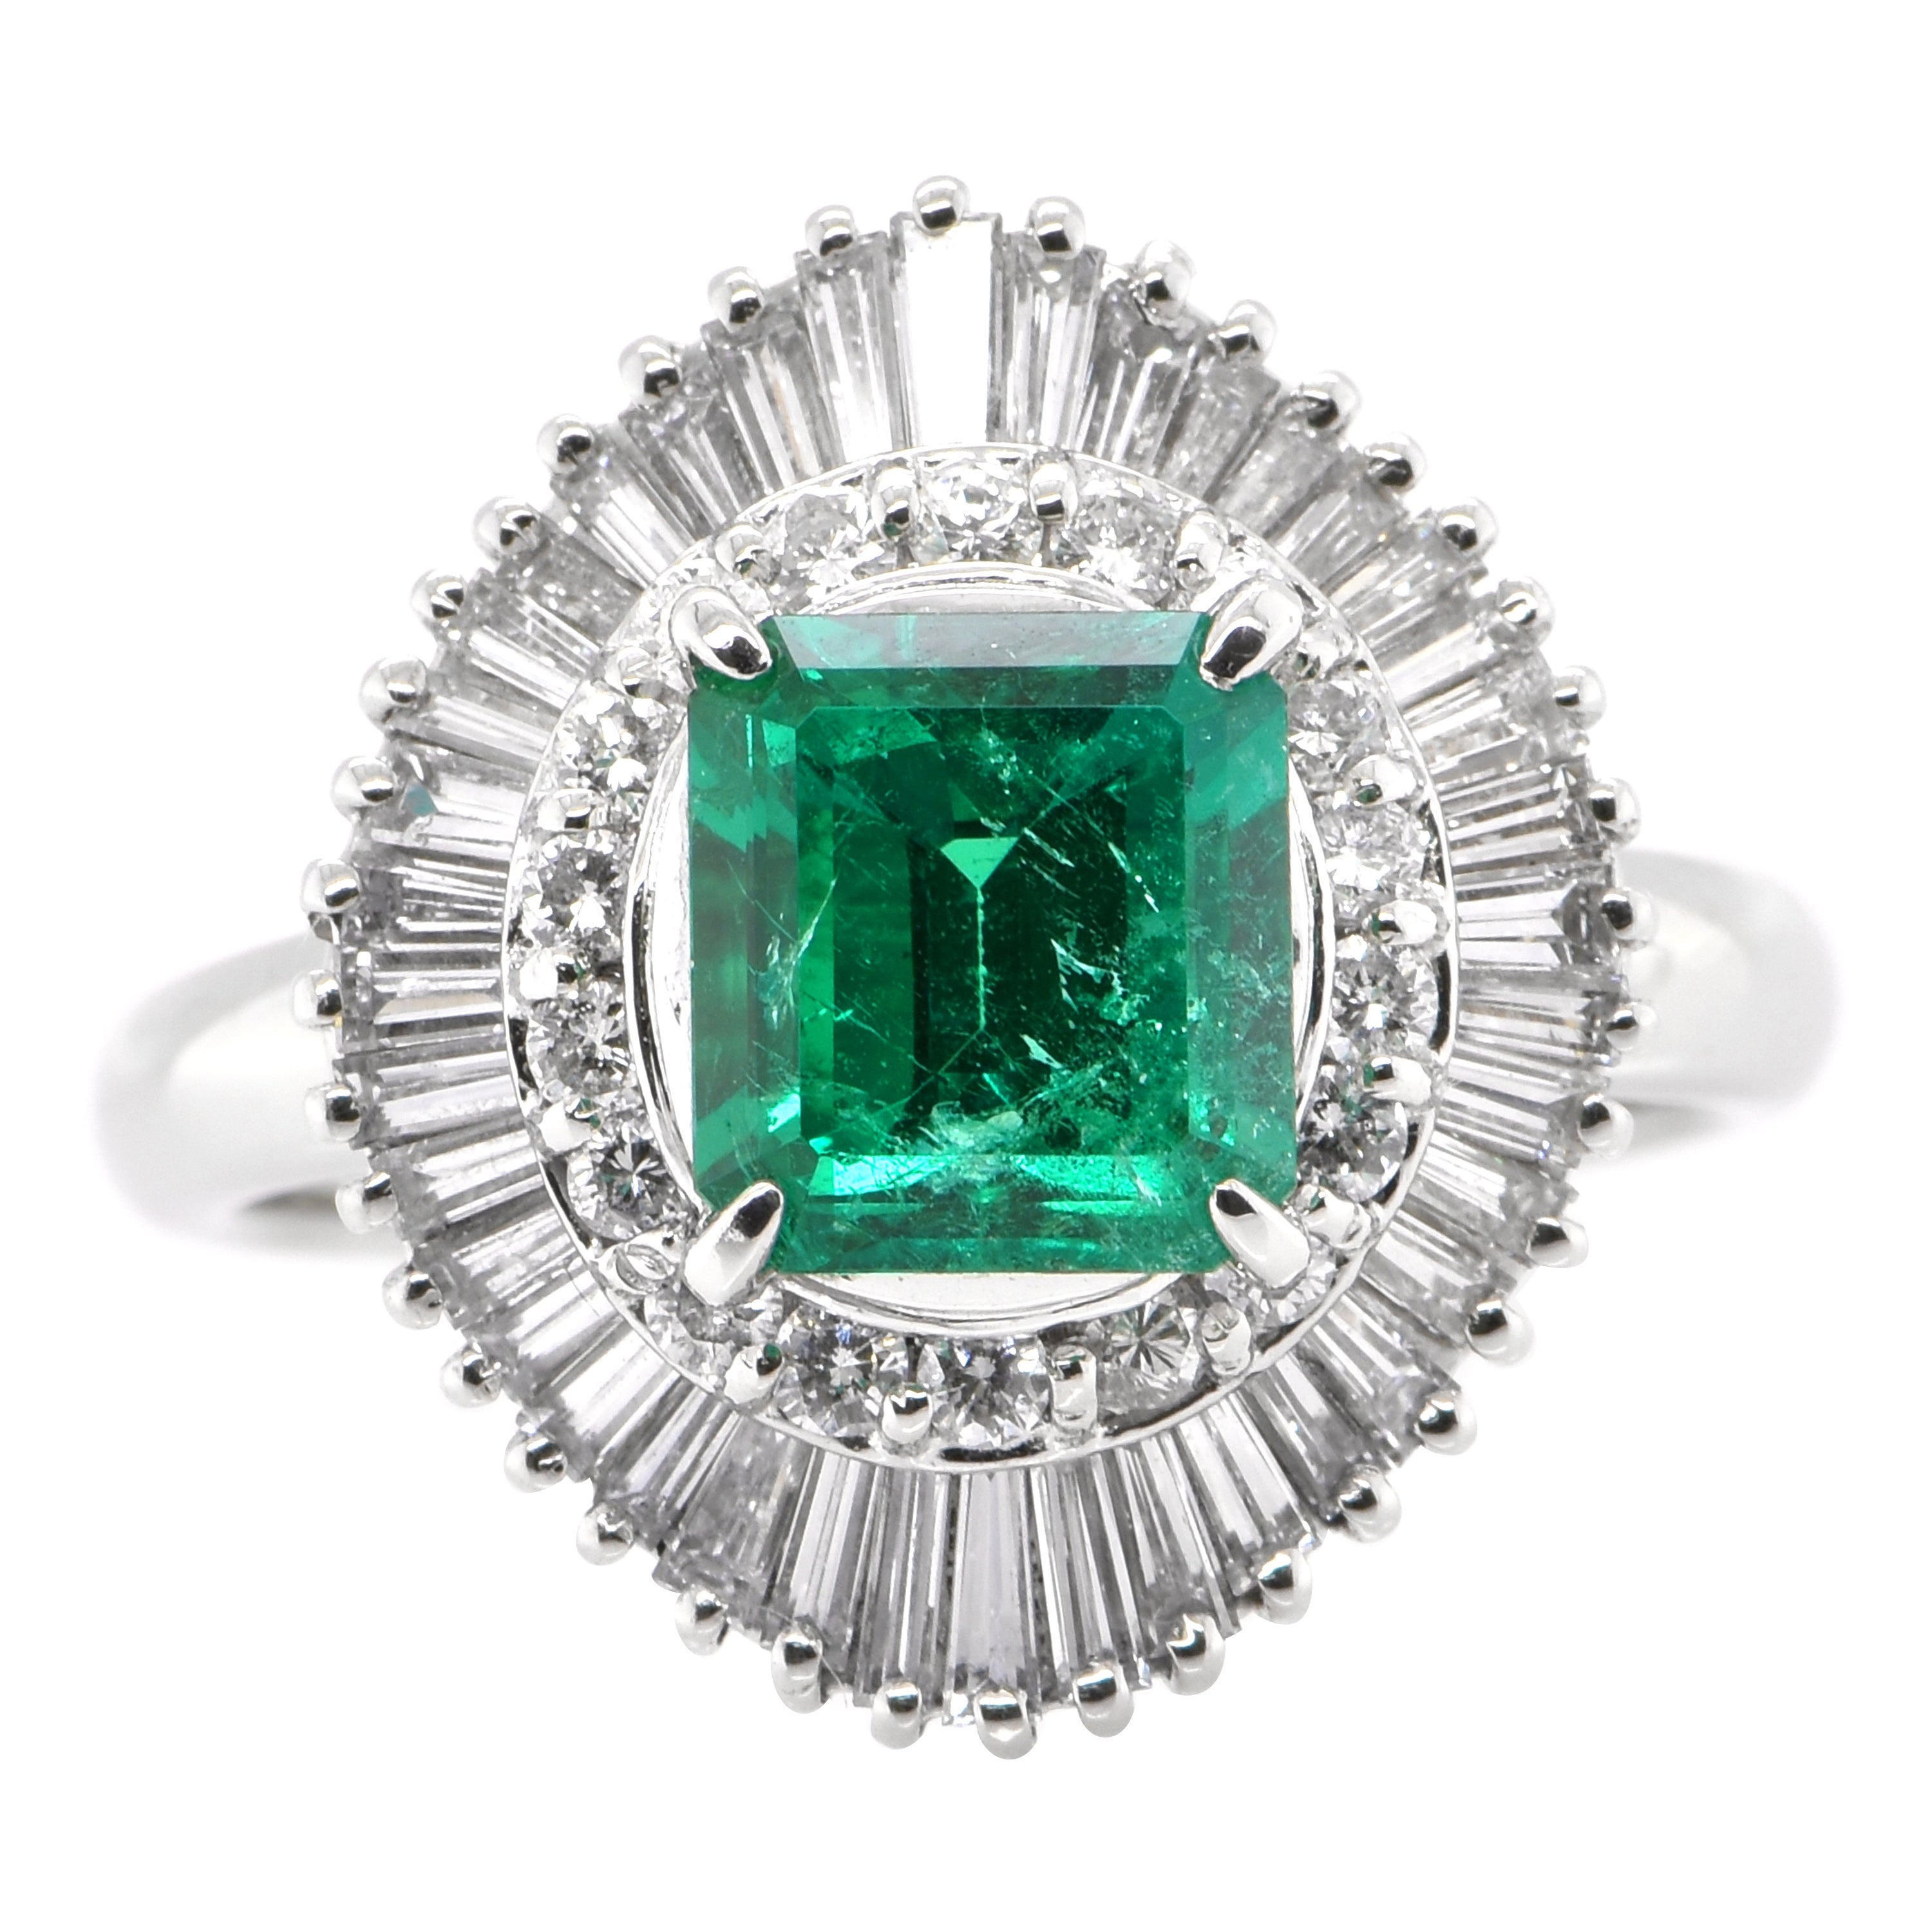 1.94 Carat Natural Emerald and Diamond Art Deco Inspired Ring Set in ...